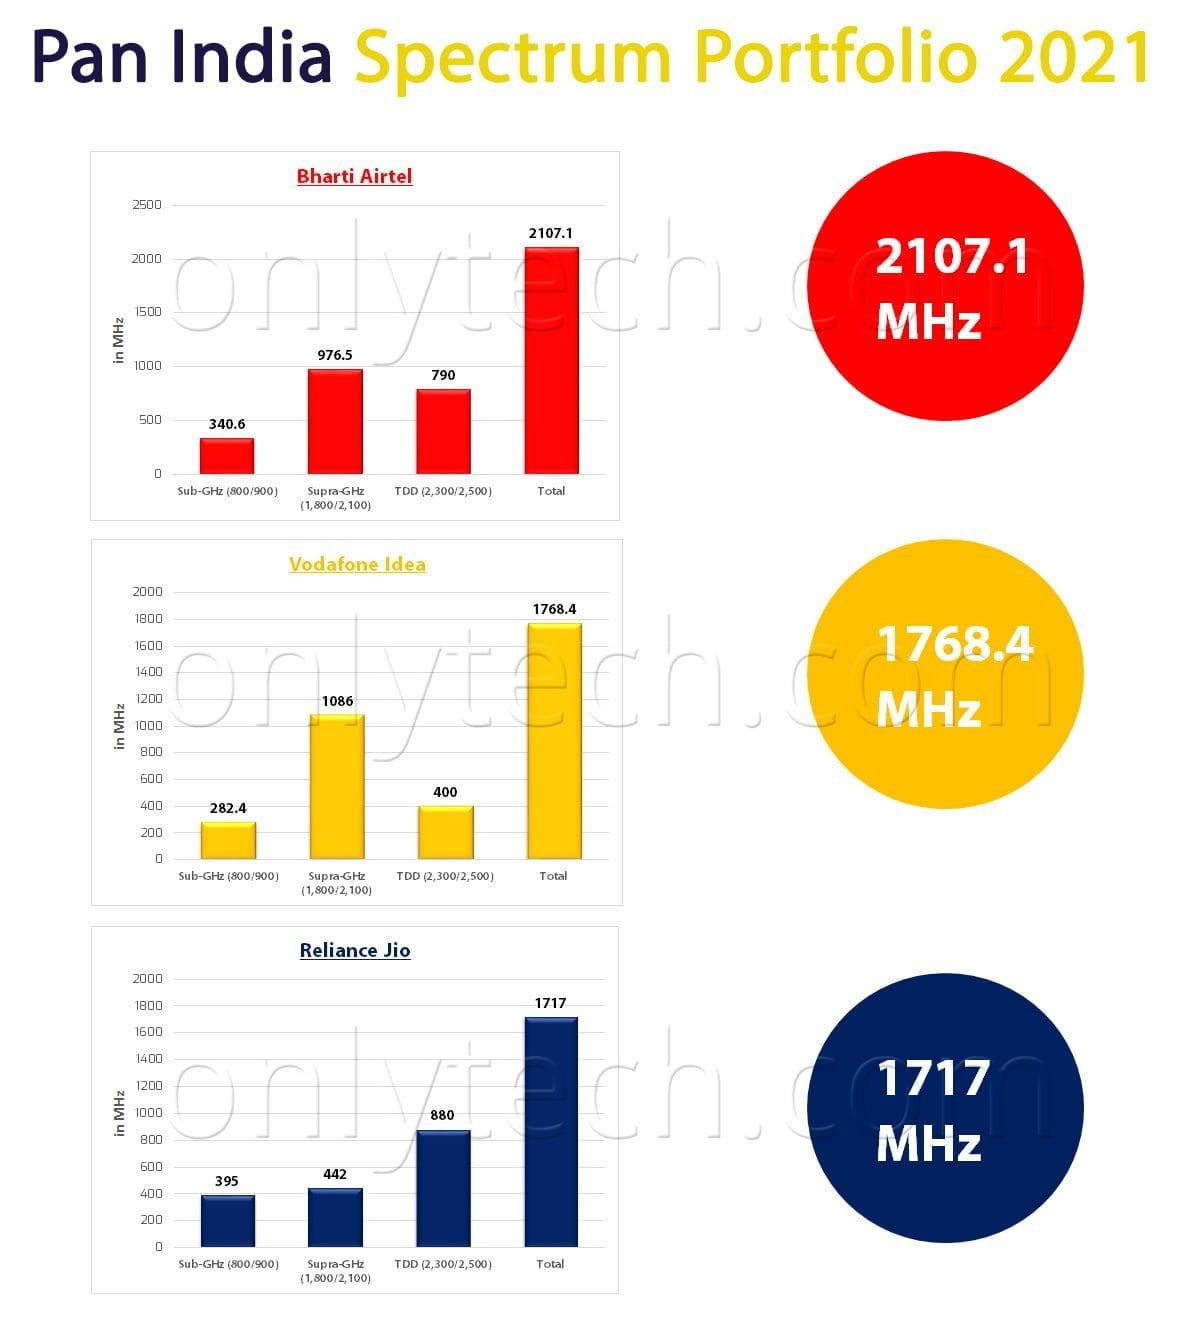 Airtel now holds the largest spectrum portfolio amongst all private operators in India